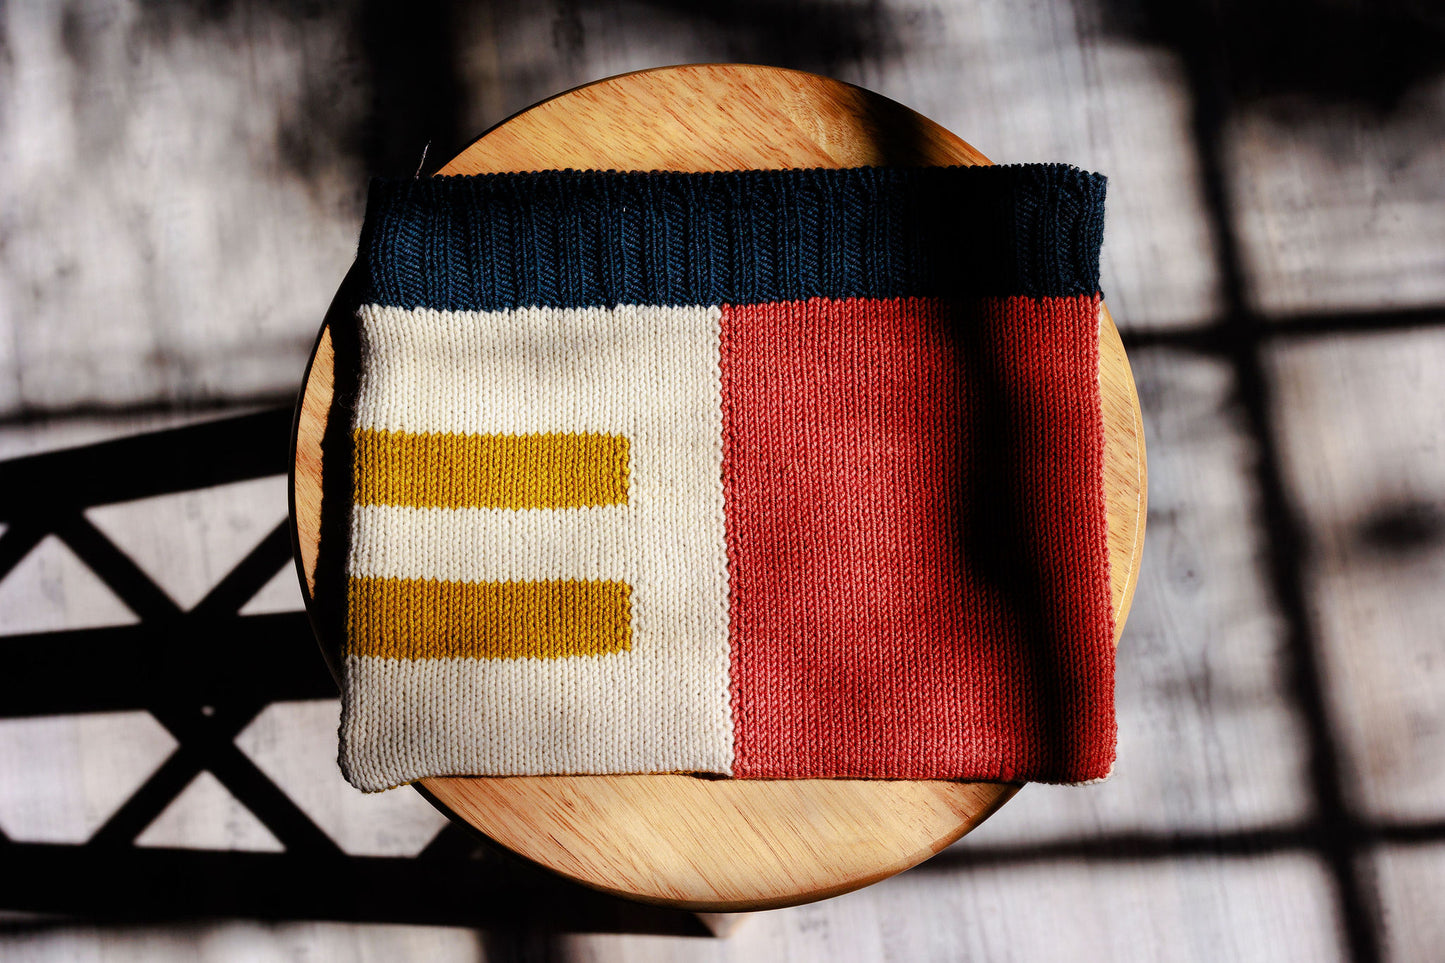 A notions case, knit with navy blue, pink, ochre, and cream yarn in an intarsia design, sits on a wooden stool.